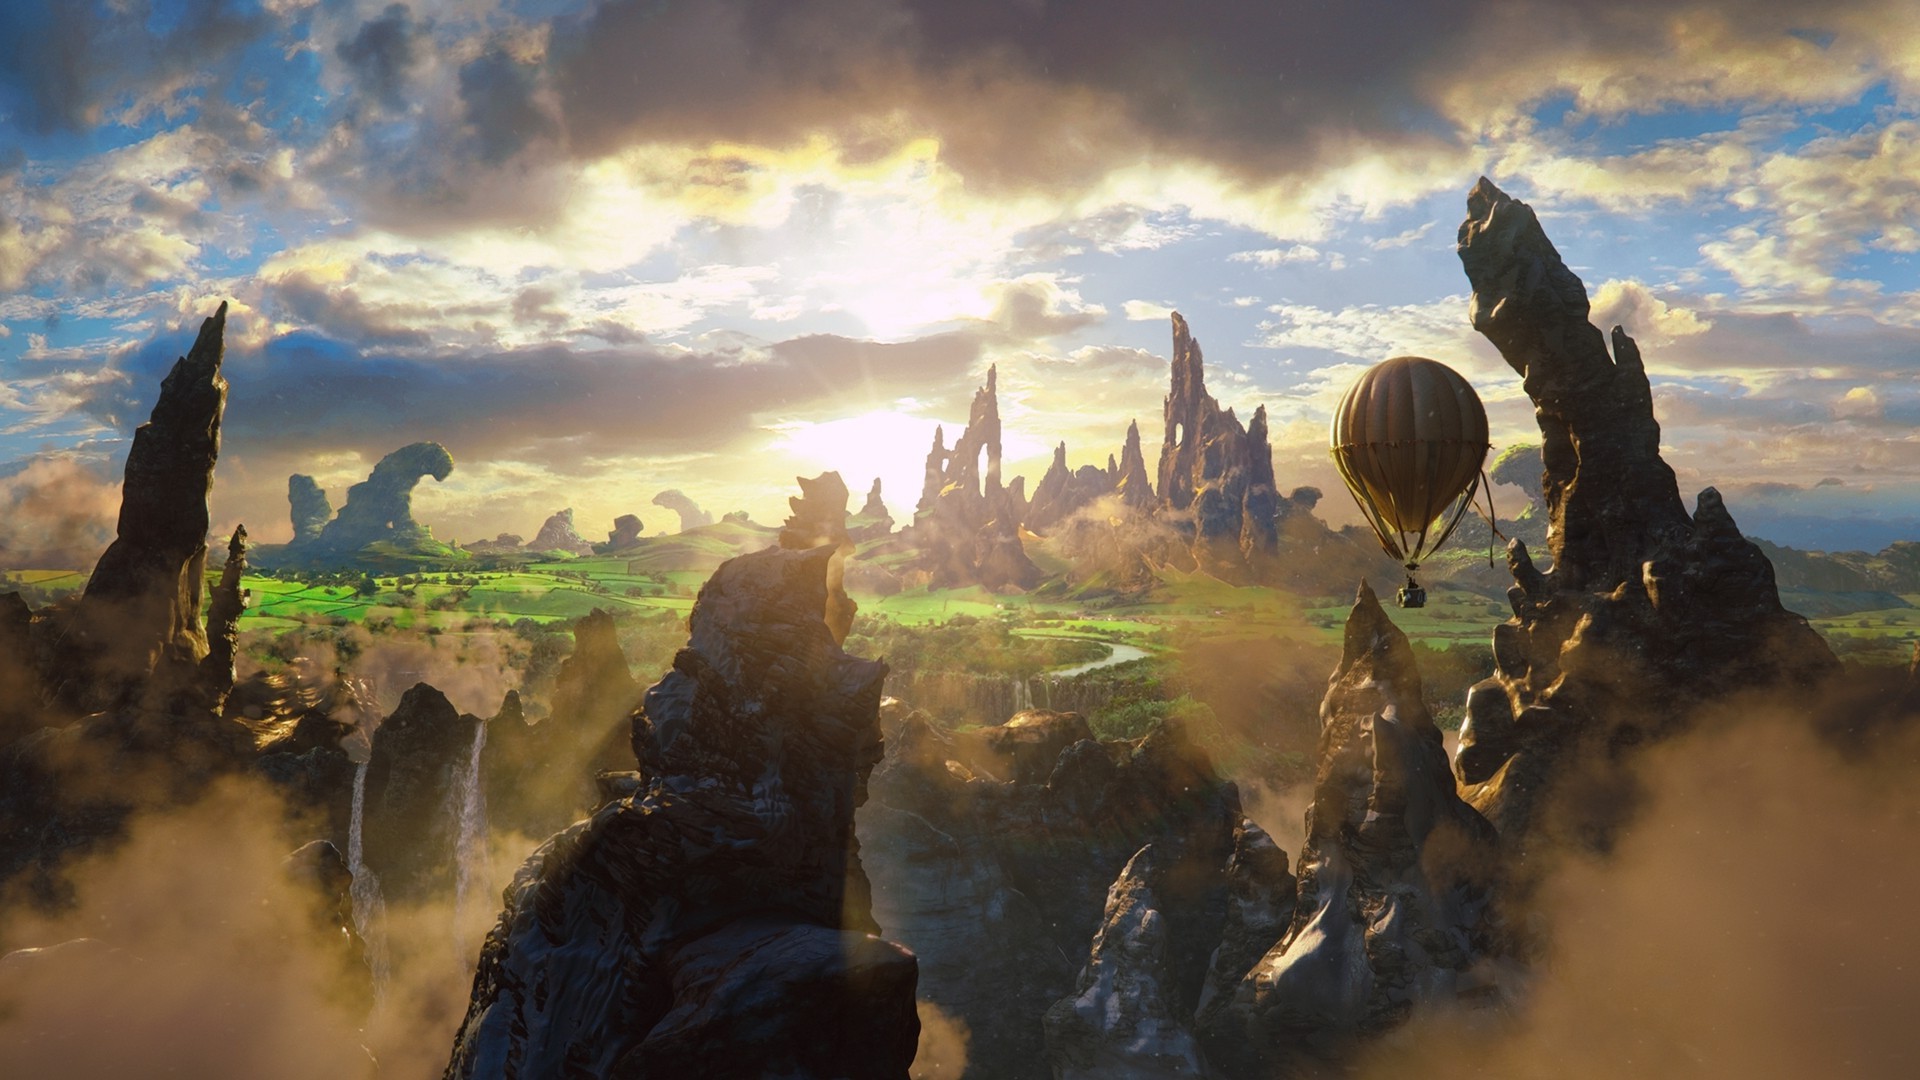 fantasy Art, Oz The Great And Powerful Wallpaper